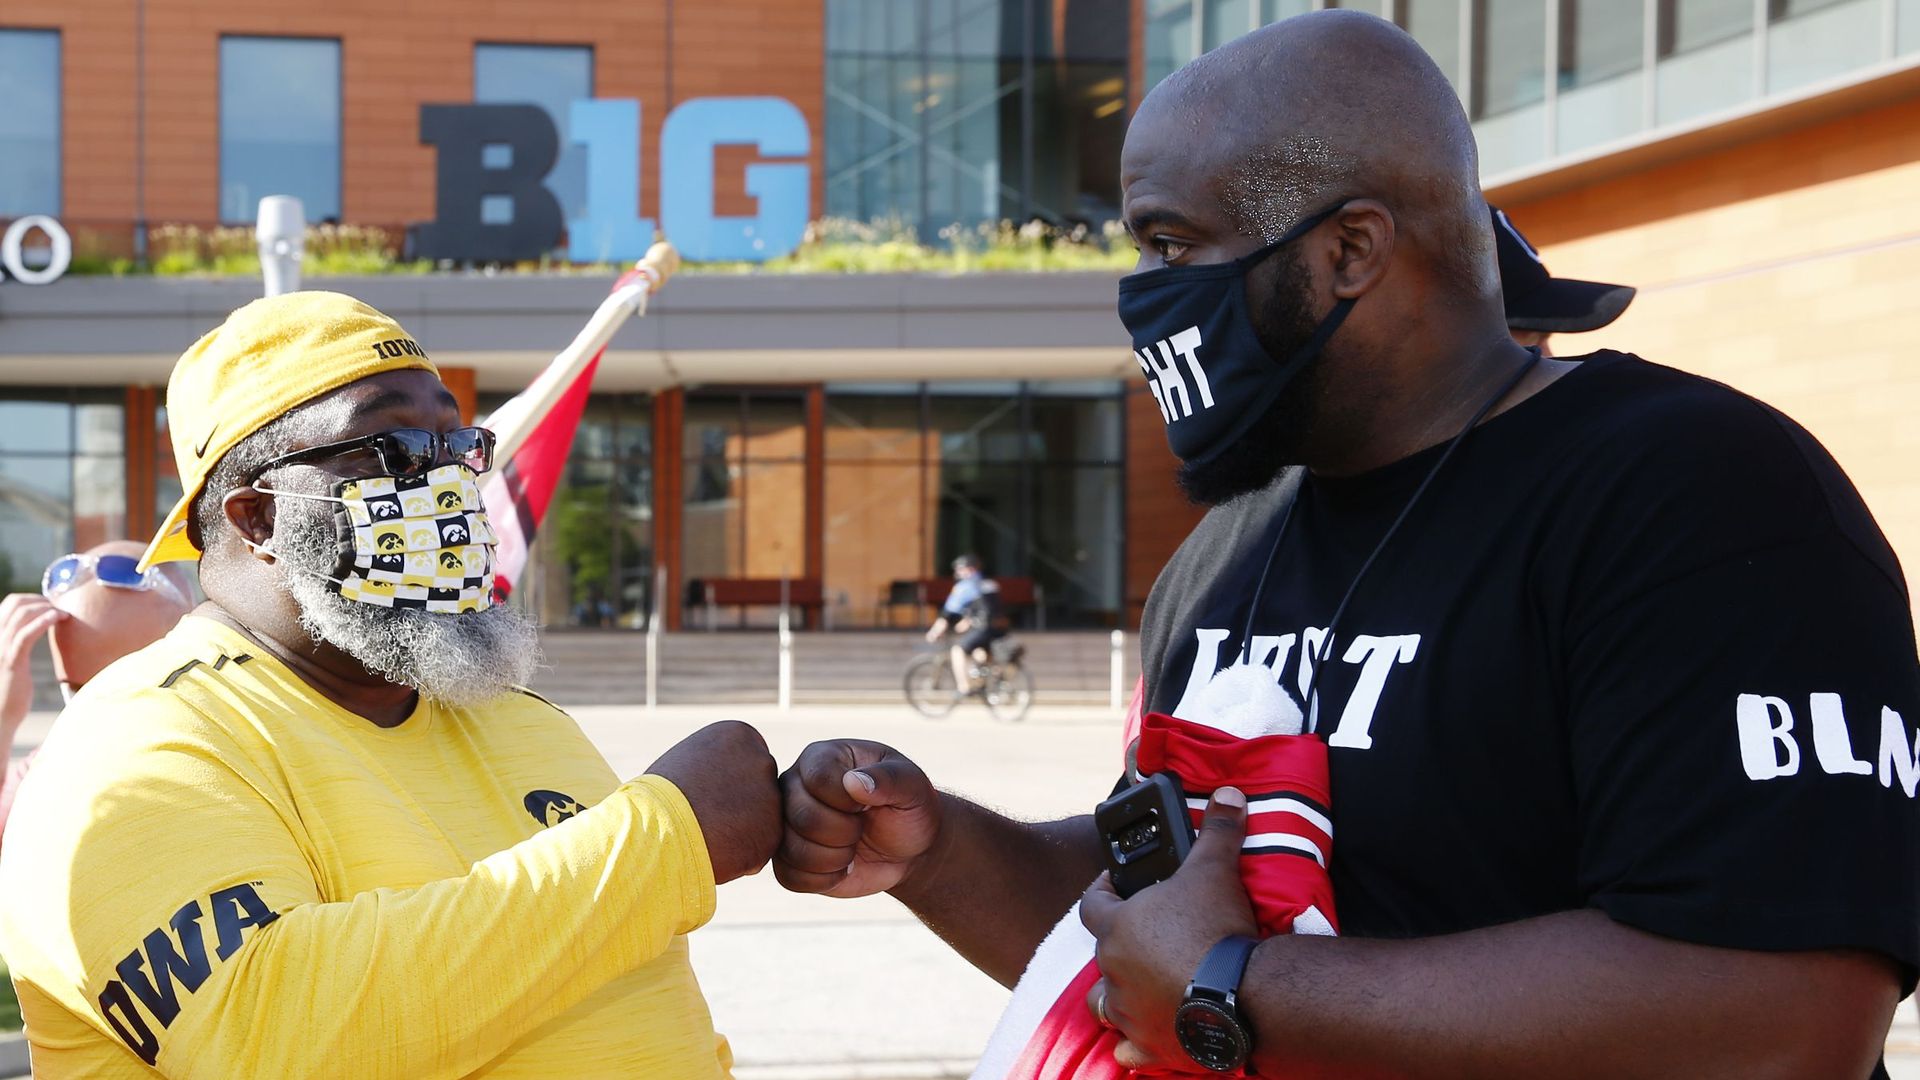 Rodney Dixon, a University of Iowa football dad (left), and Randy White, an Ohio State dad, during a parents' protest outside Big Ten HQ in Rosemont, Ill., on Aug. 21.